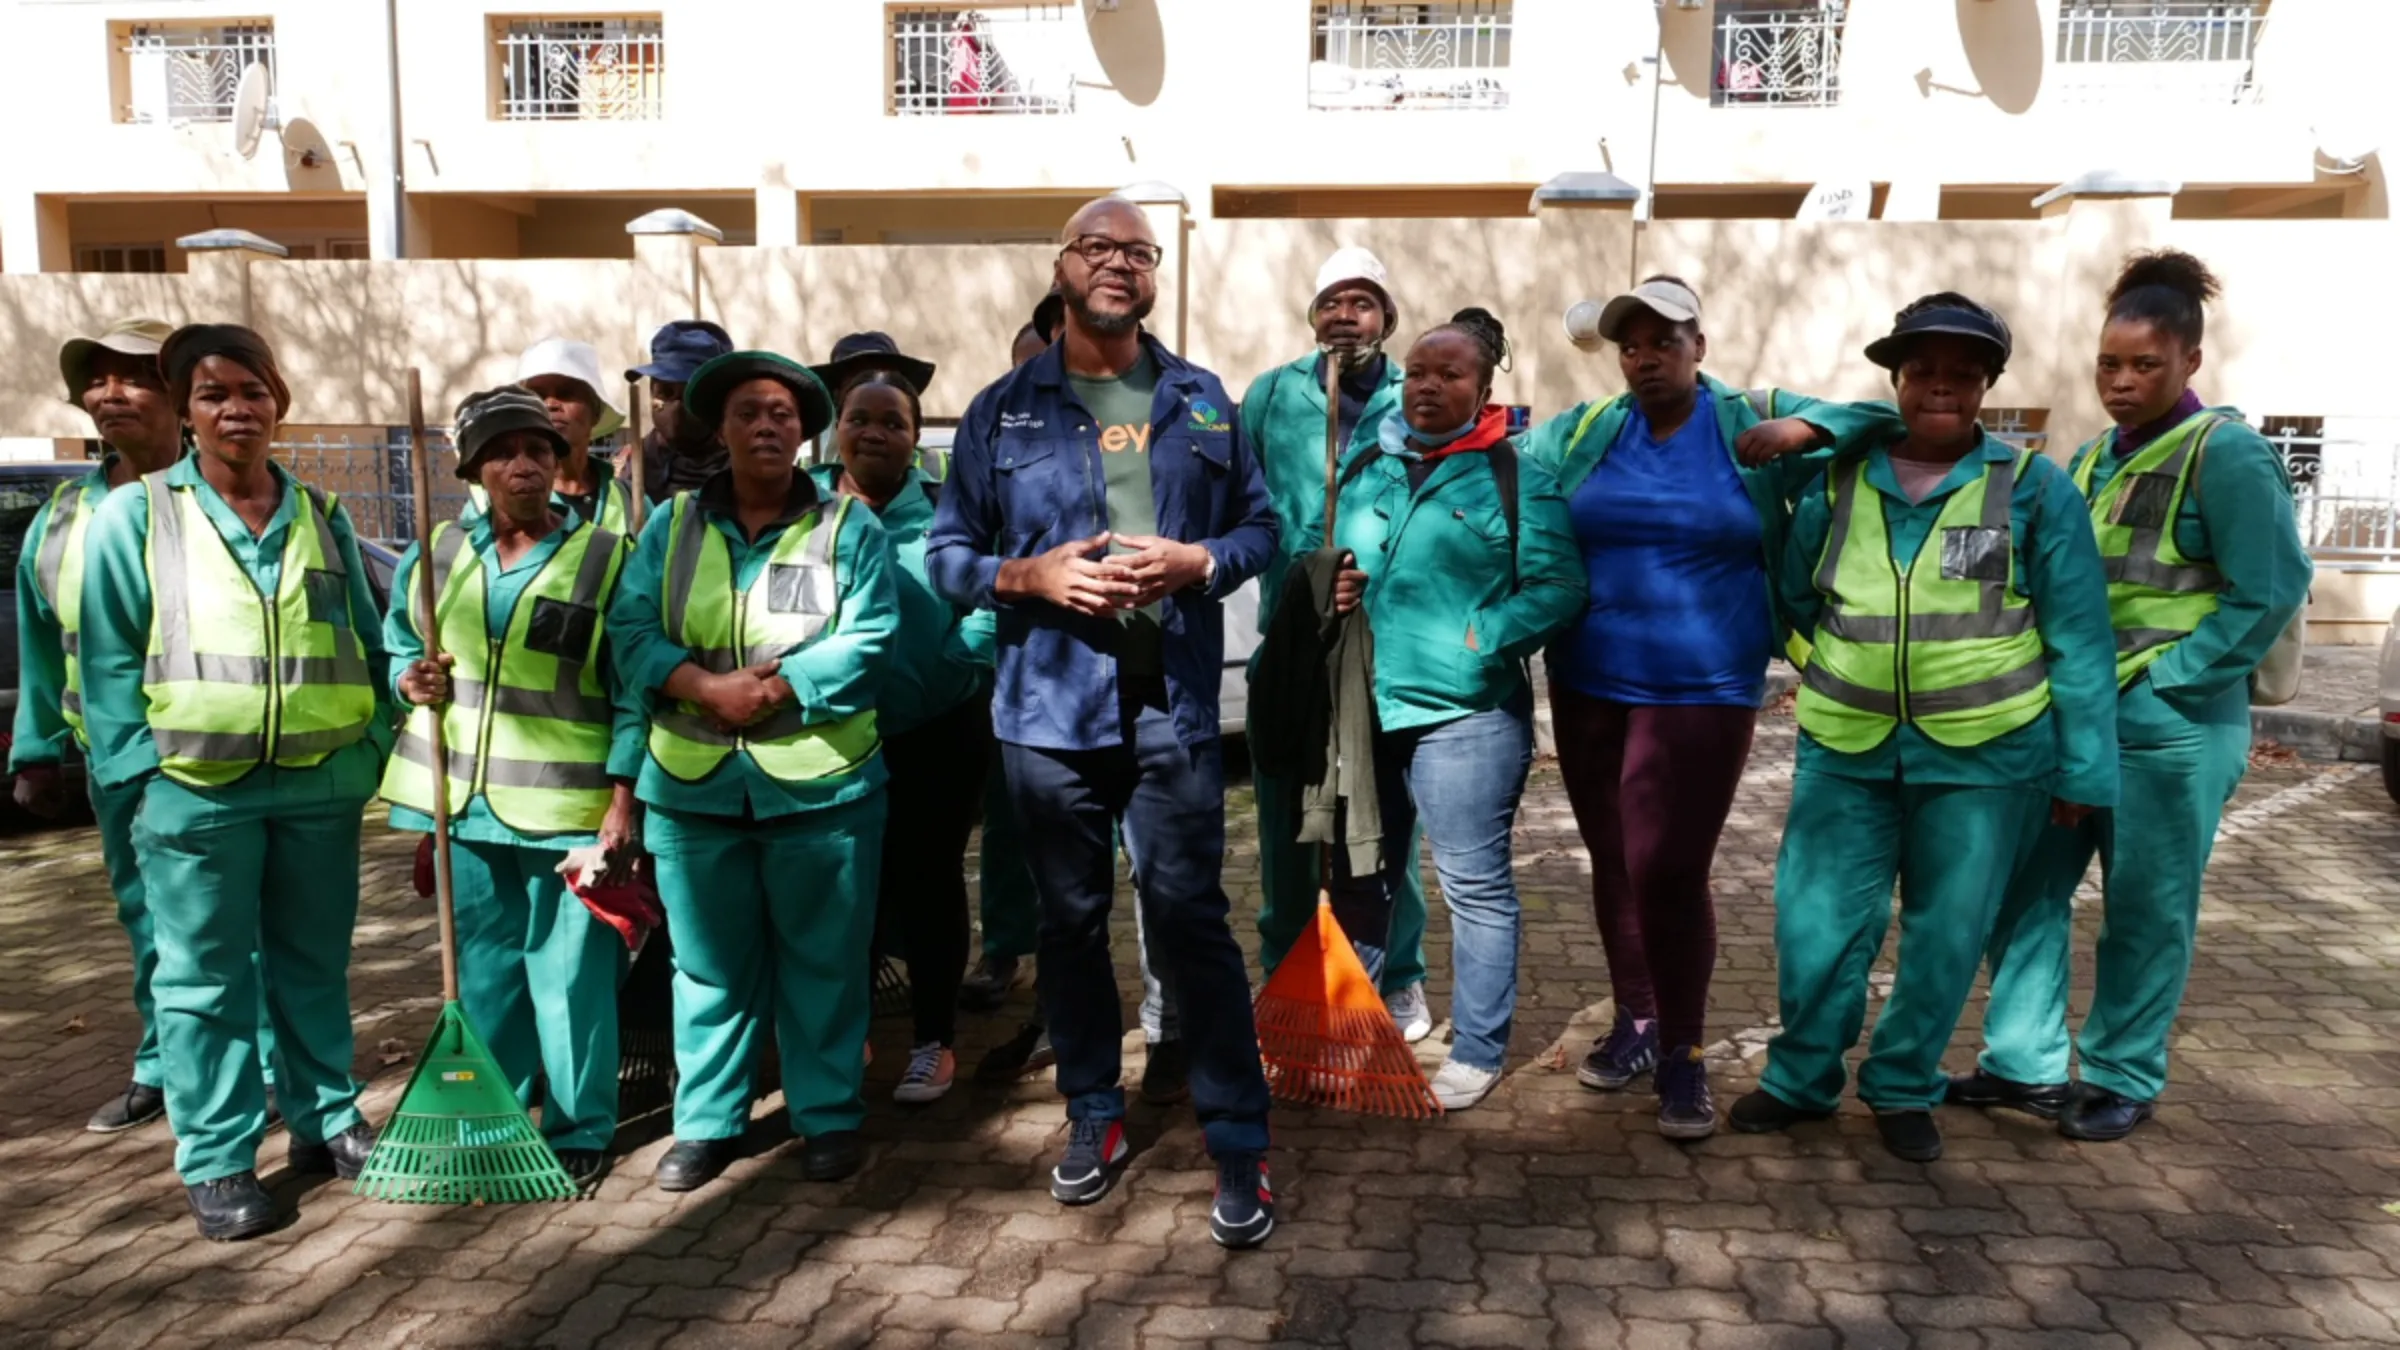 Dalu Cele, the founder of Clean City SA, stands in front of some of the cleaners he has helped train and employ with the presidential funding stimulus in inner-city Johannesburg, South Africa, May 10, 2023. Thomson Reuters Foundation/ Kim Harrisberg